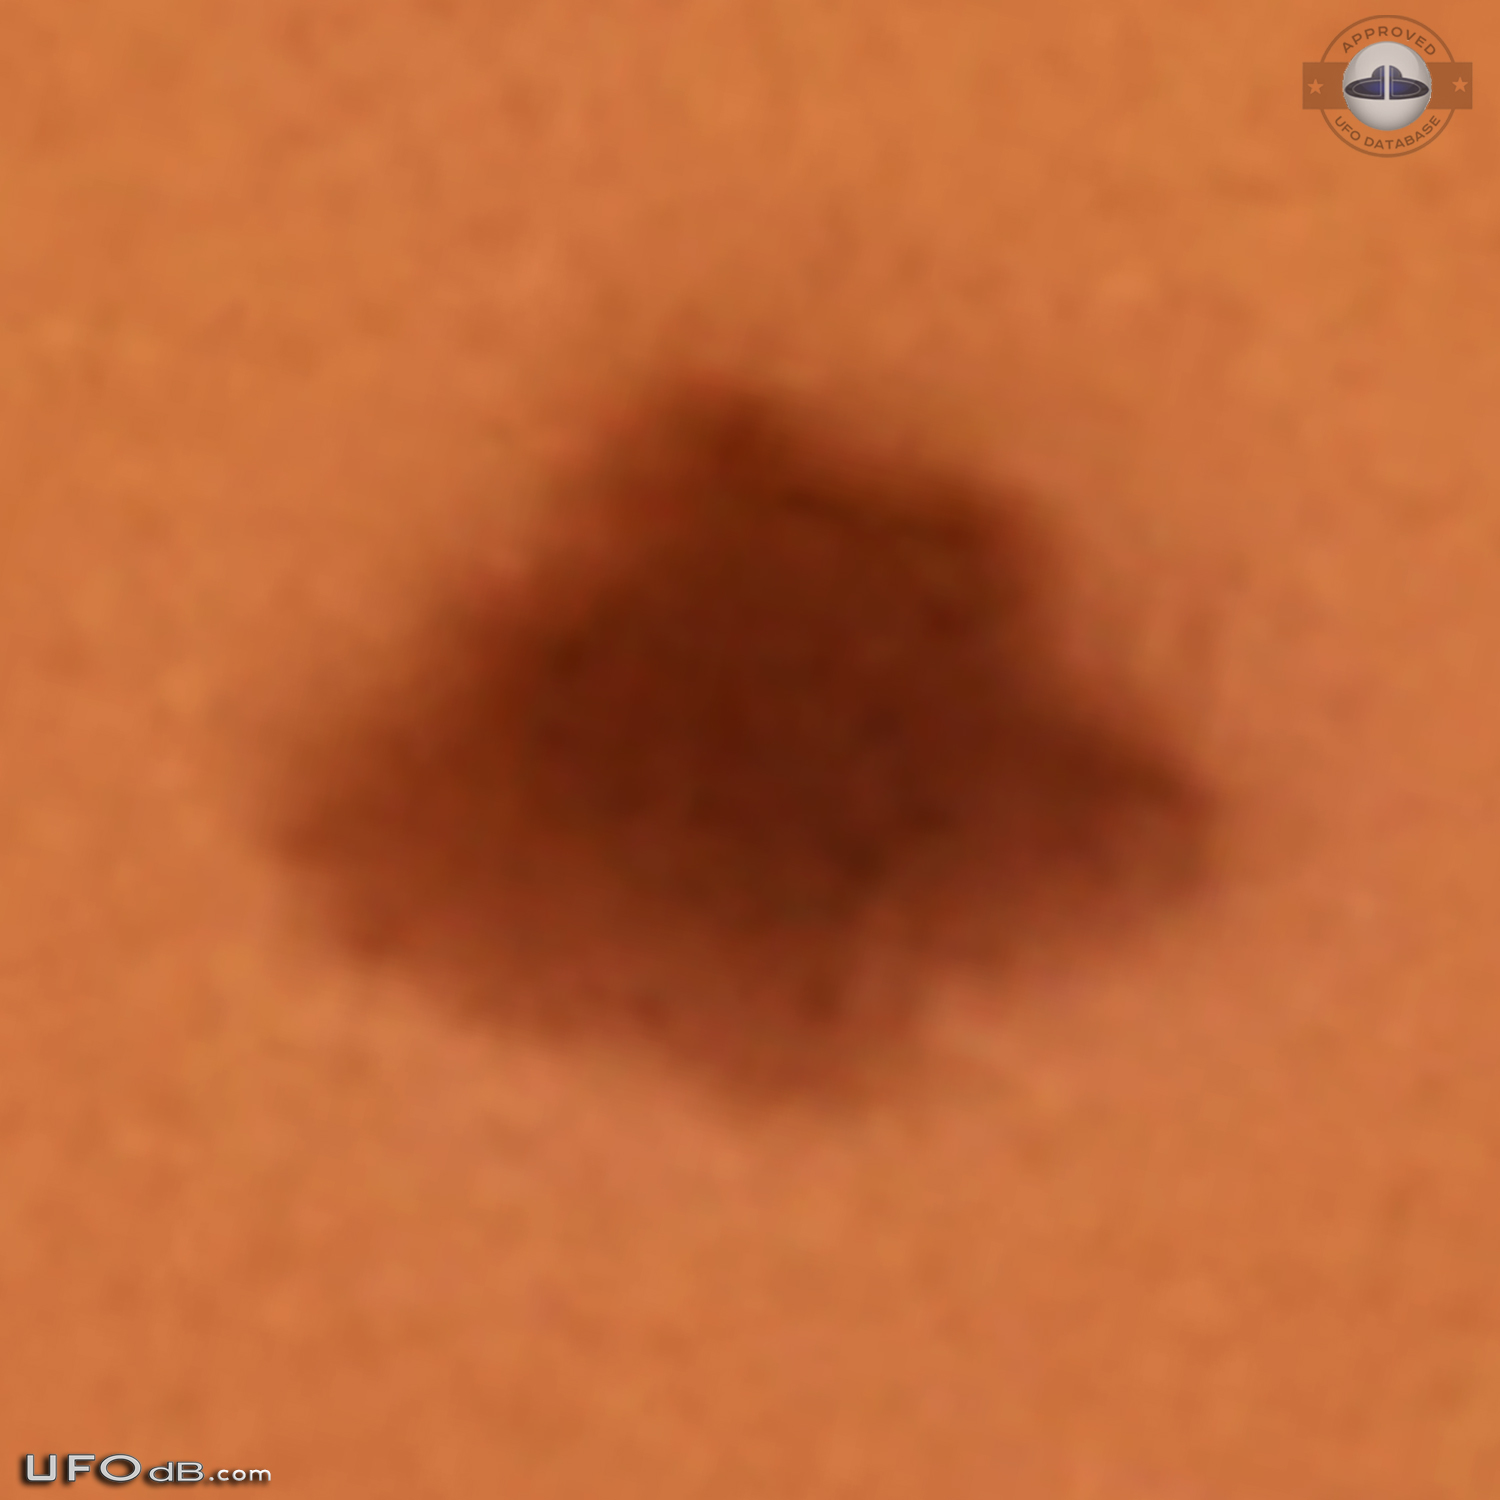 3 witness saw a black bell UFO disappearing in clouds - Australia 2013 UFO Picture #551-5